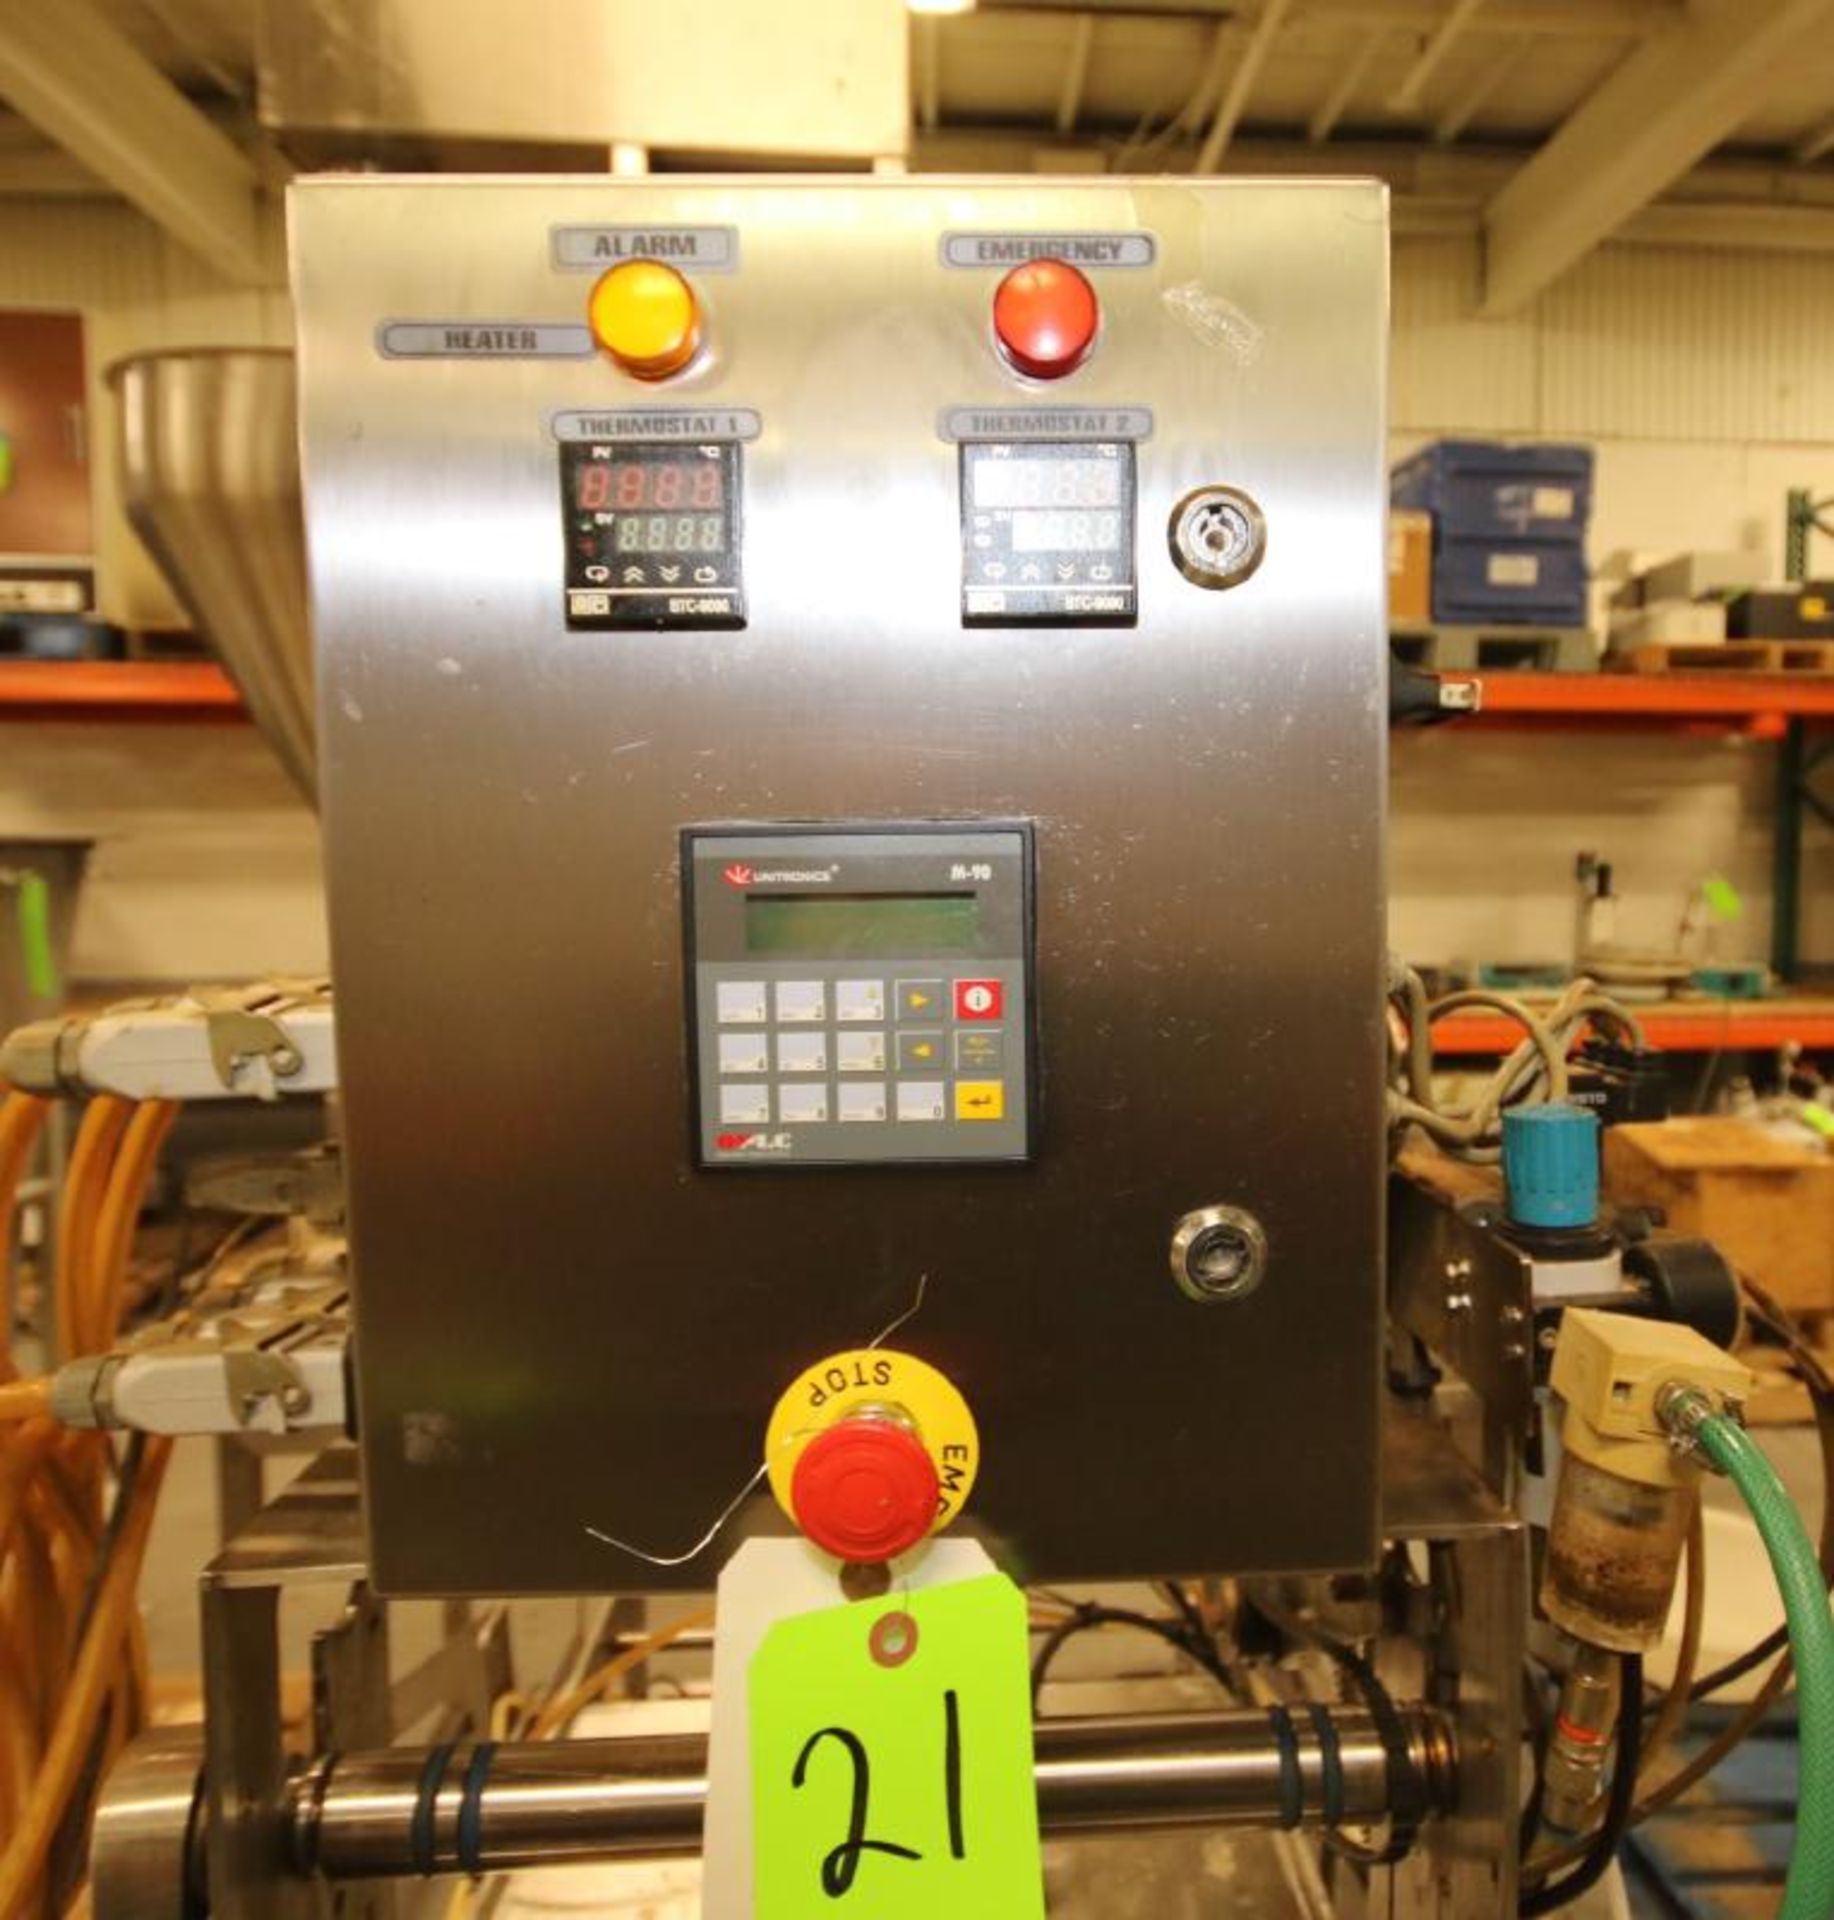 Packline 2-Head S/S Tamper Evident Sealer with 6" W x 8" H Change Parts and Controls Mounted on S/S - Image 7 of 8